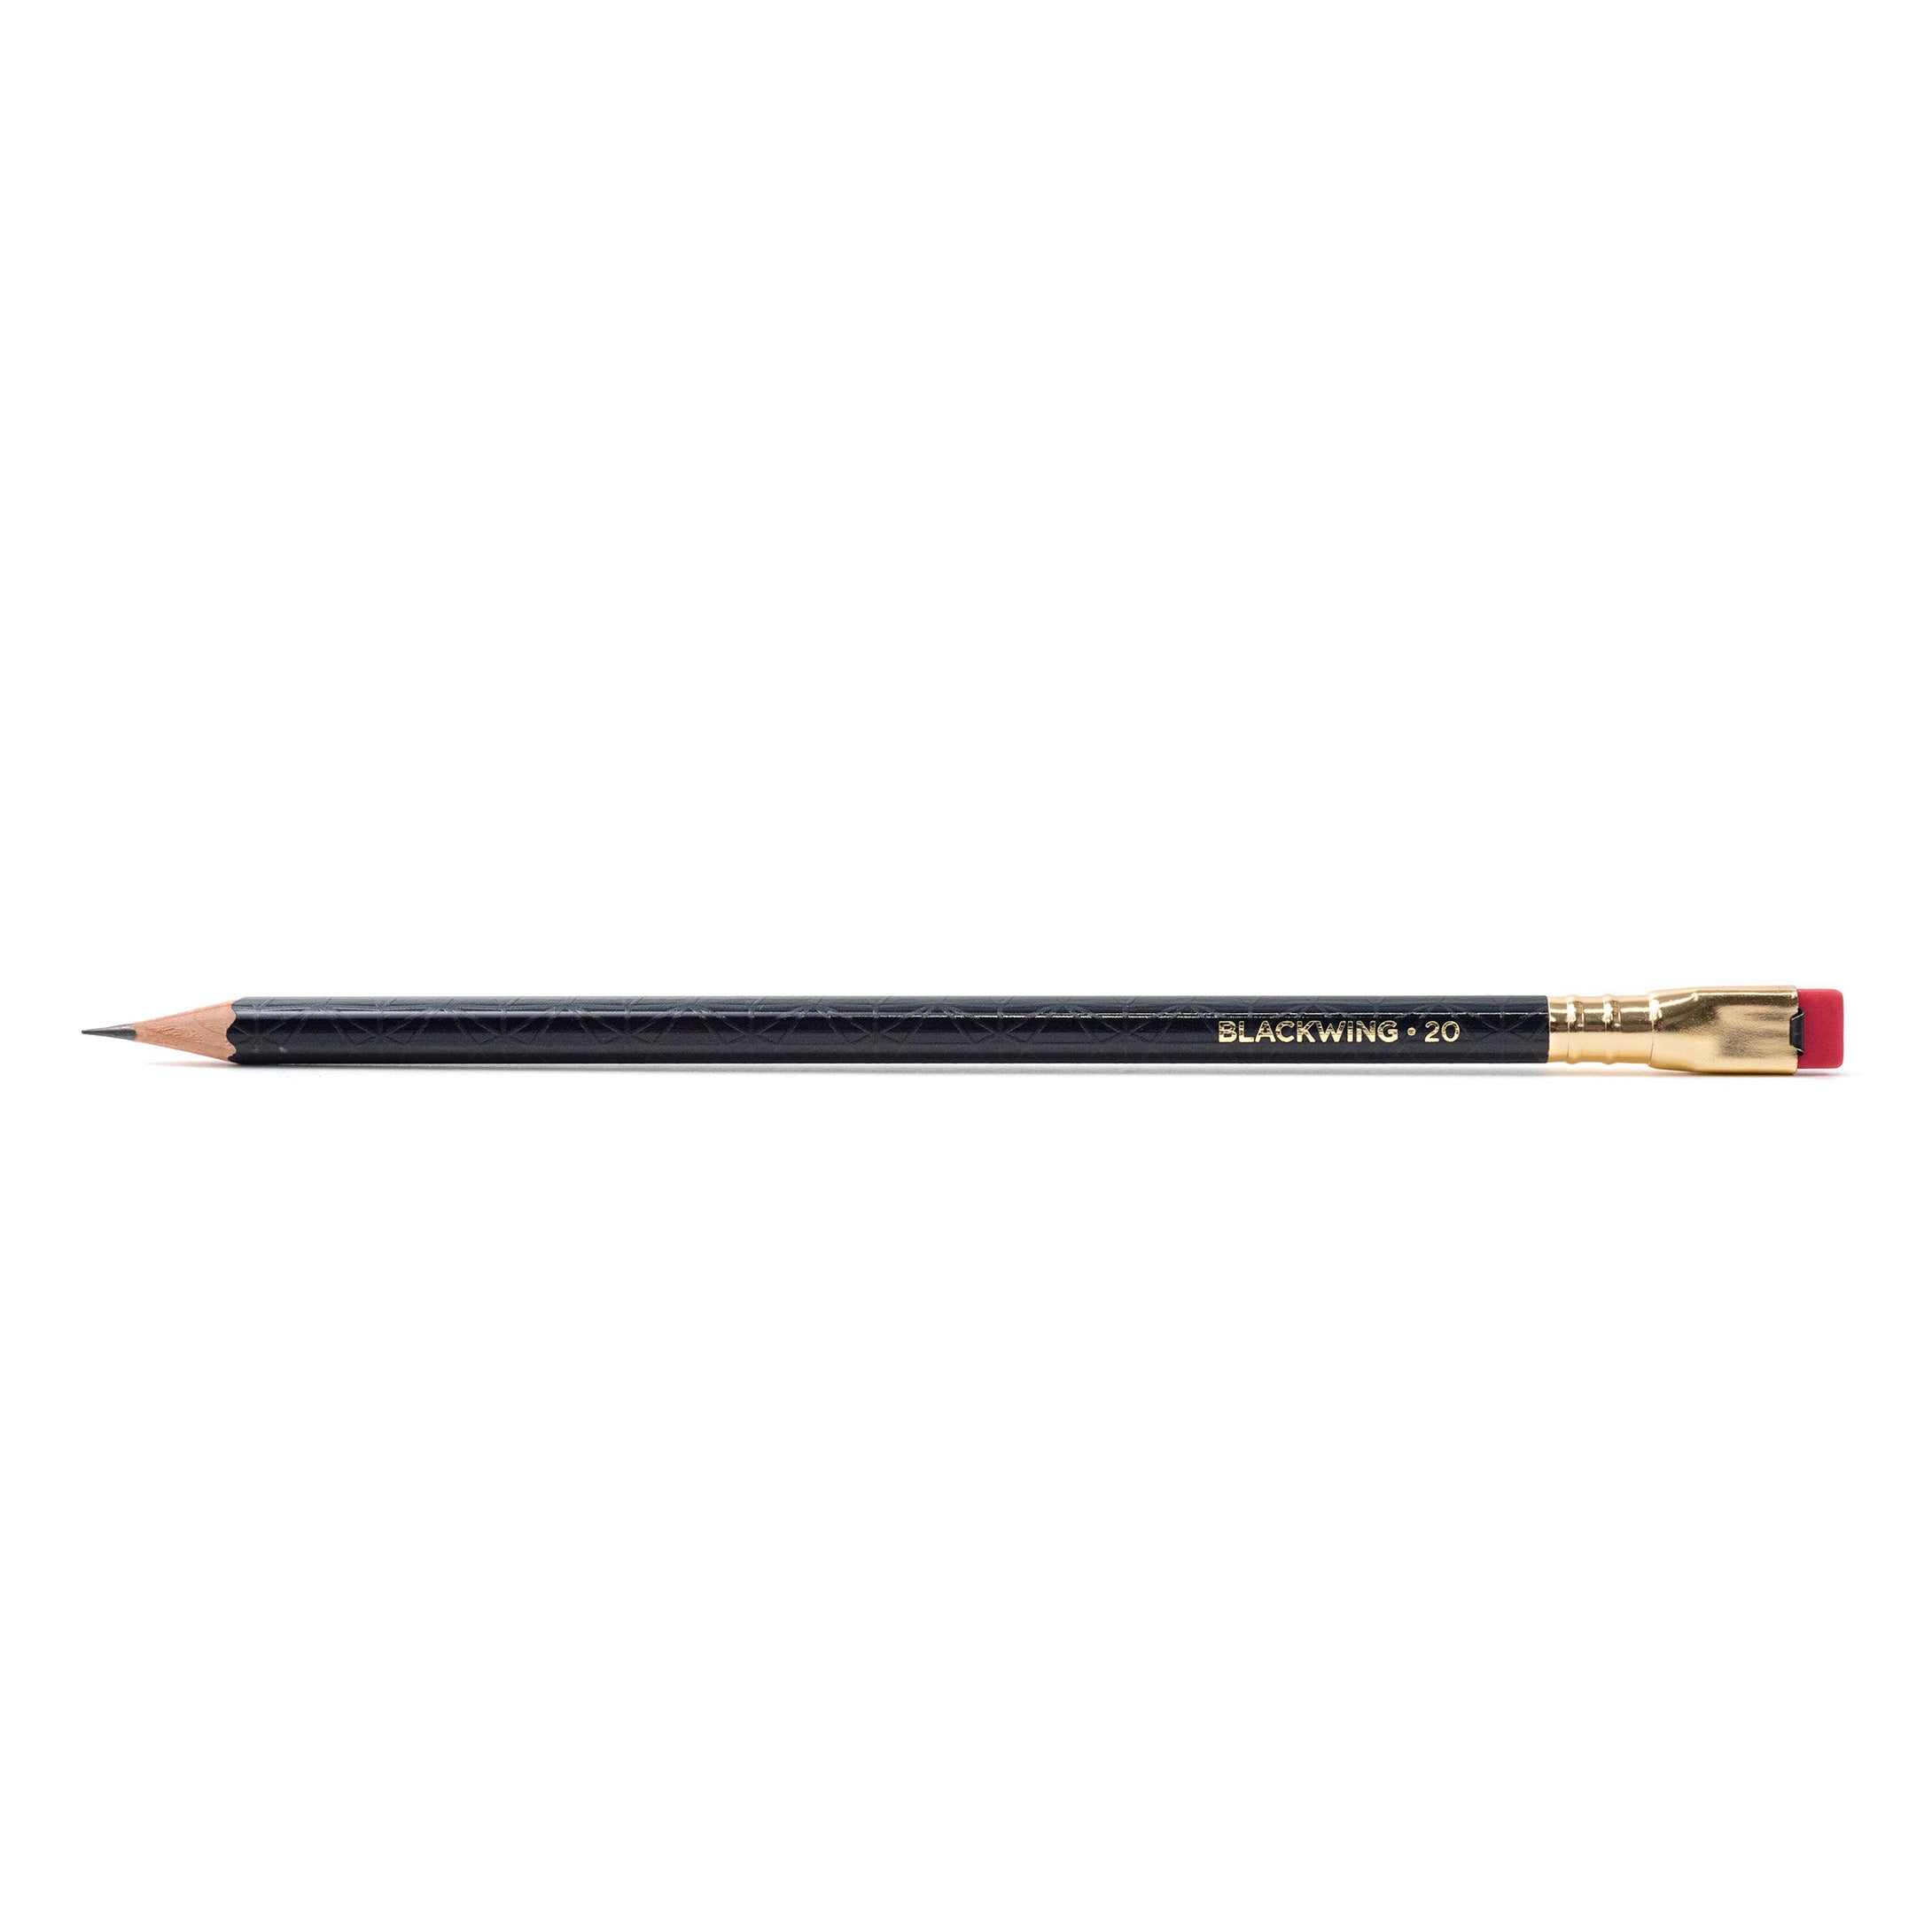 Blackwing volume 20 limited edition